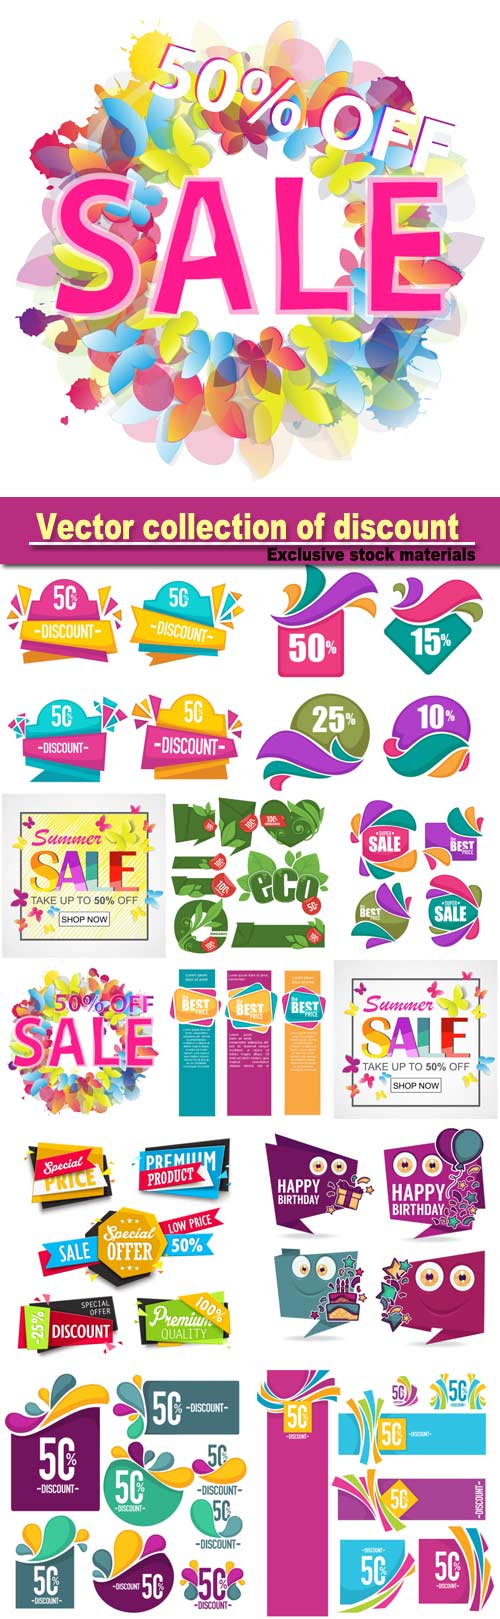 Vector collection of discount and sale bubbles, tags, banners and stickers